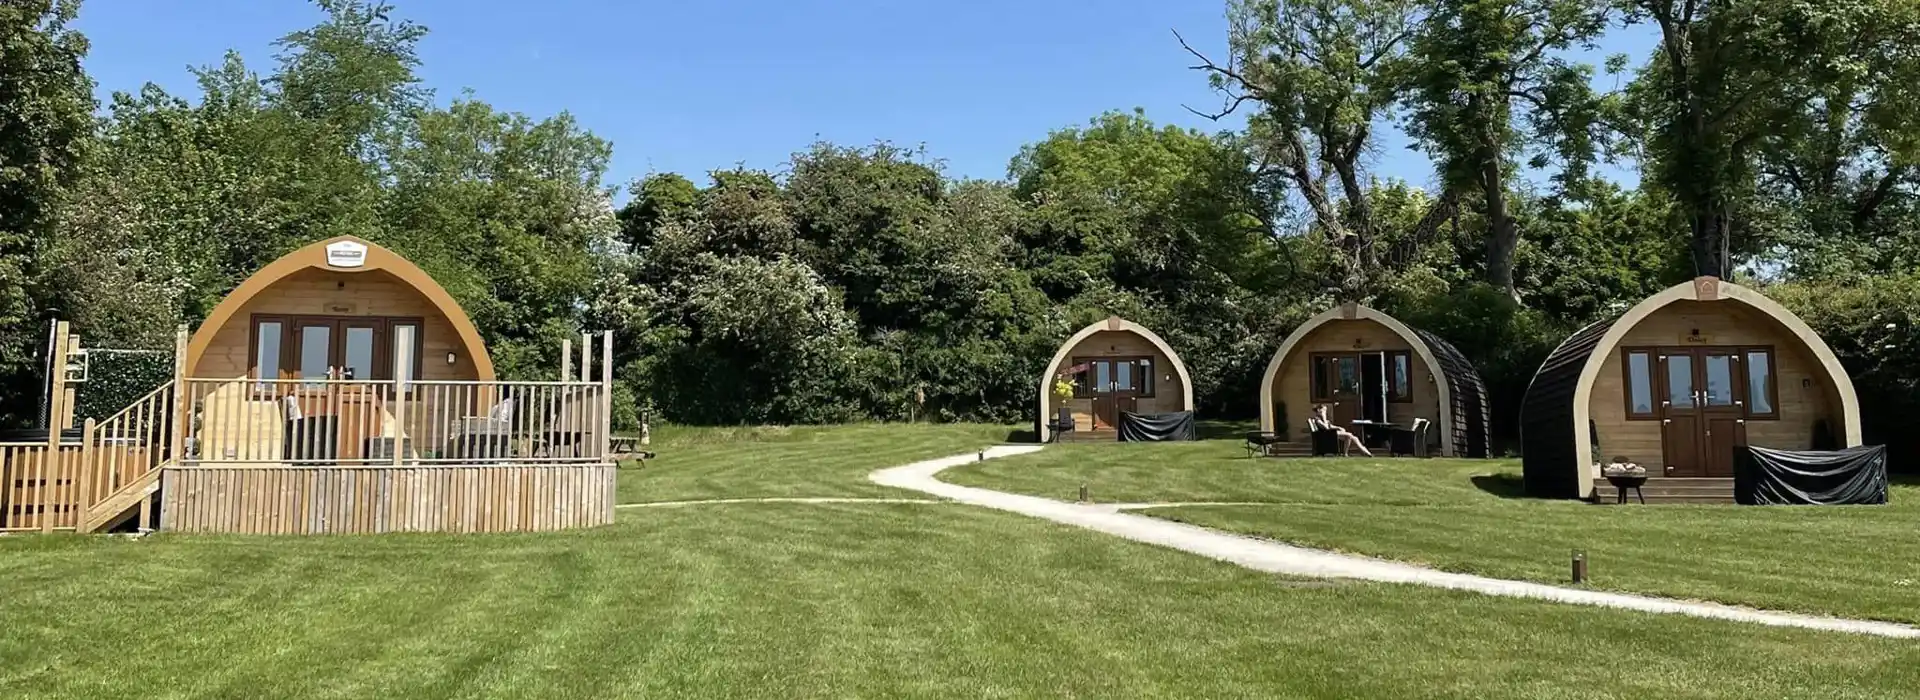 Camping and glamping pods with hot tubs in Nottingham